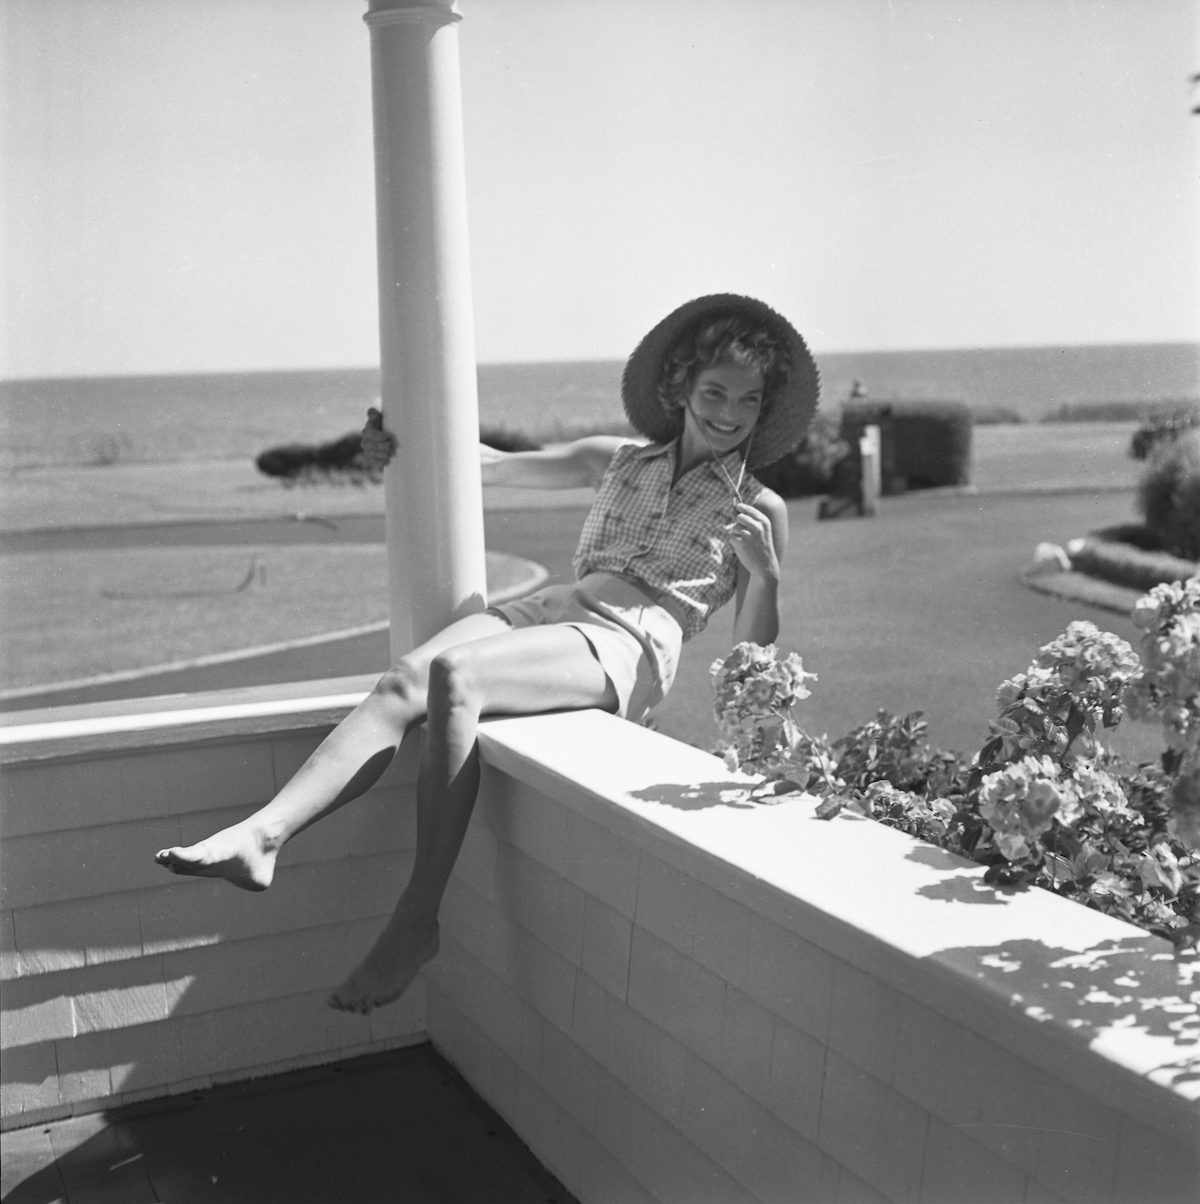 Jacqueline Bouvier on vacation smiling in 1953